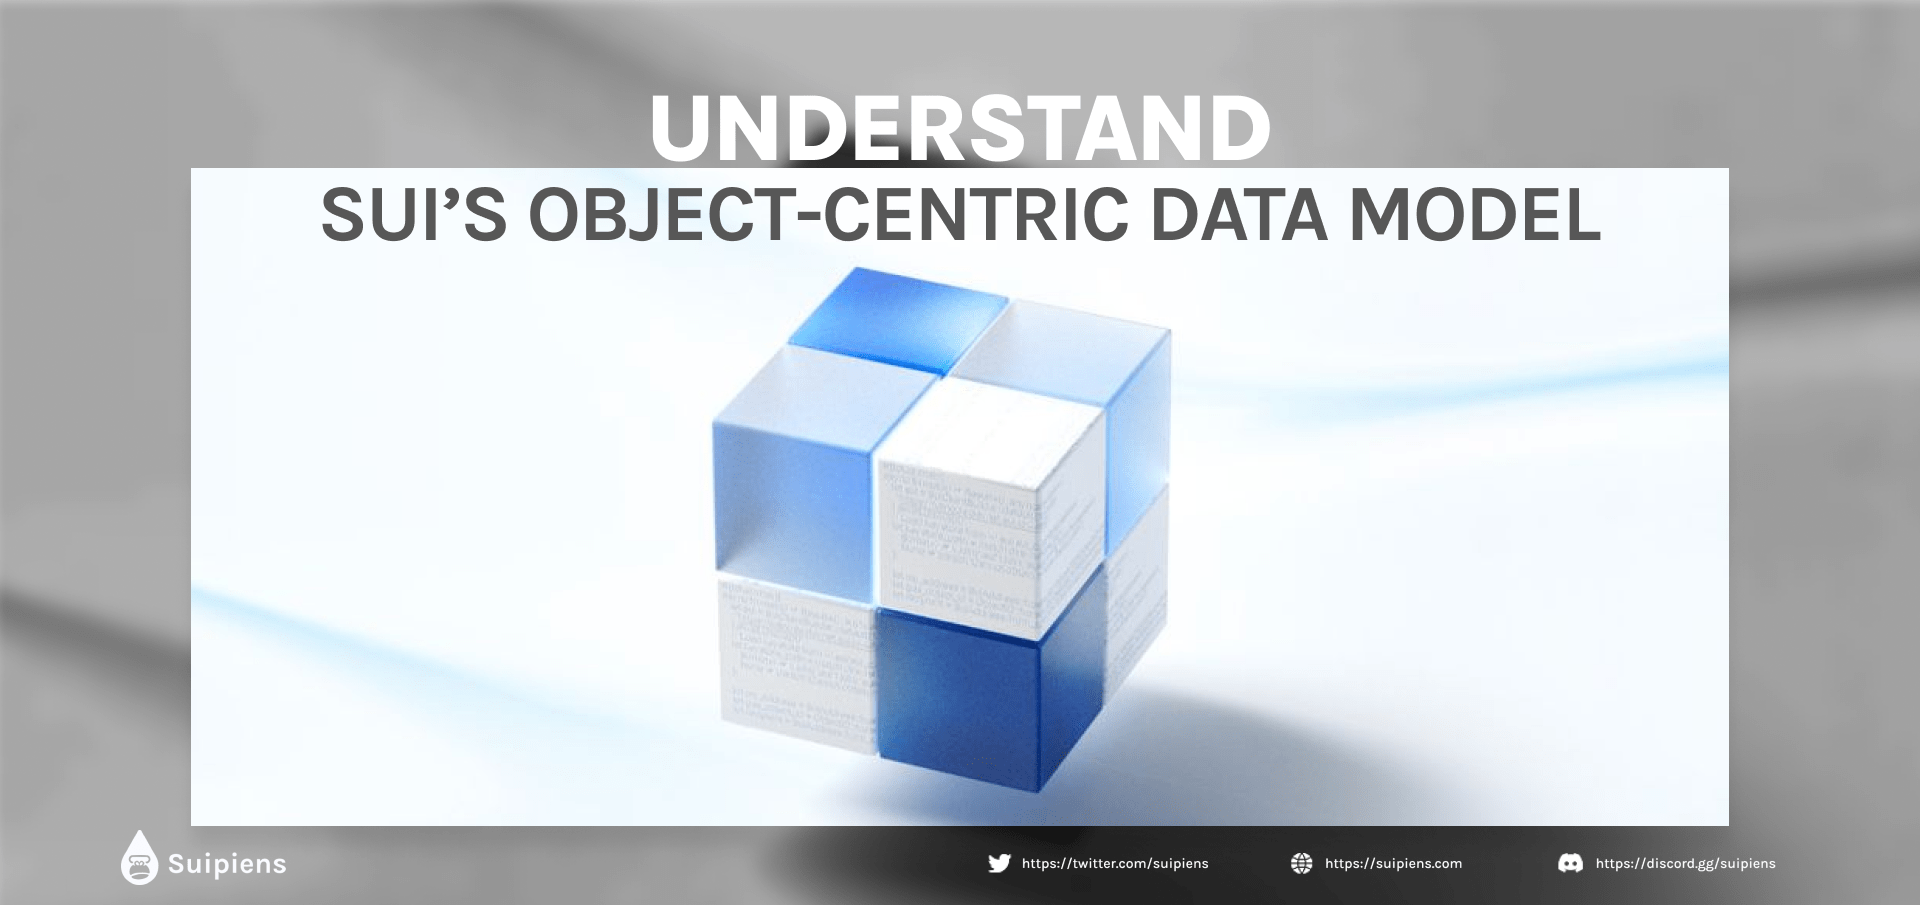 Understand Sui’s Object-centric Data Model